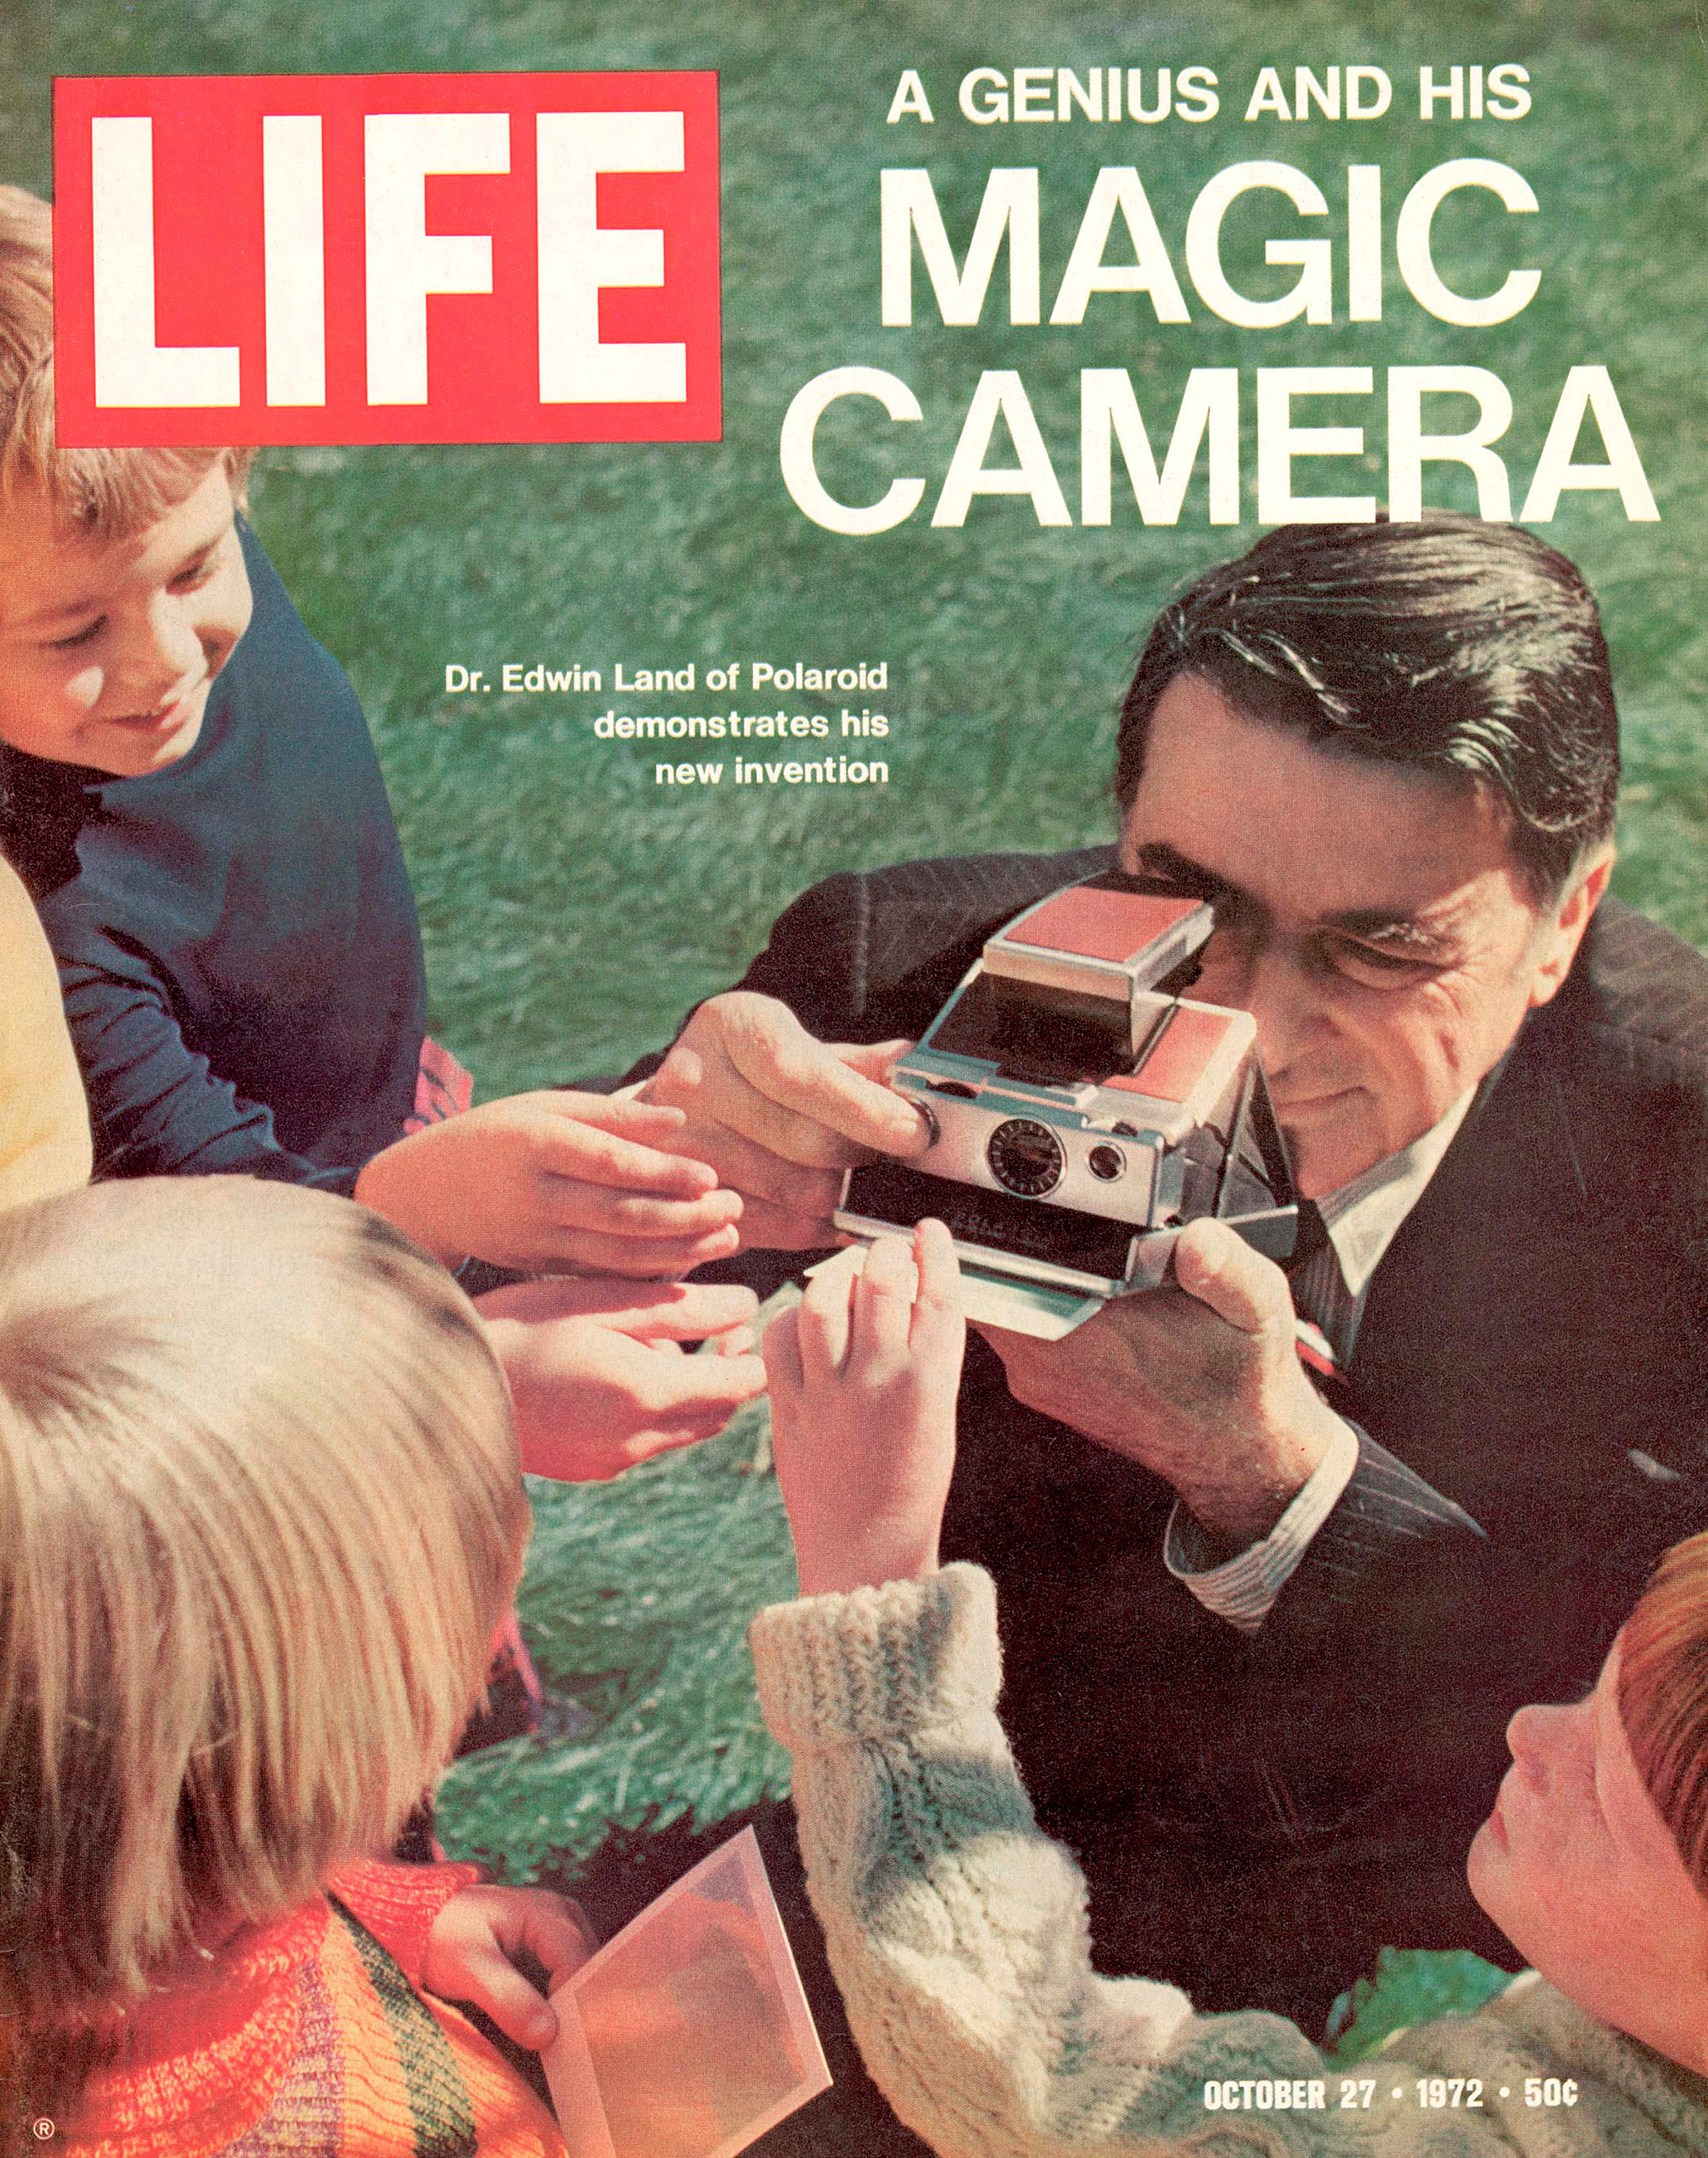 Edwin Land of Polaroid on the cover of LIFE magazine, October 27, 1972.October 27, 1972 cover of LIFE magazine. (Co Rentemeester—The LIFE Picture Collection/Getty Images)